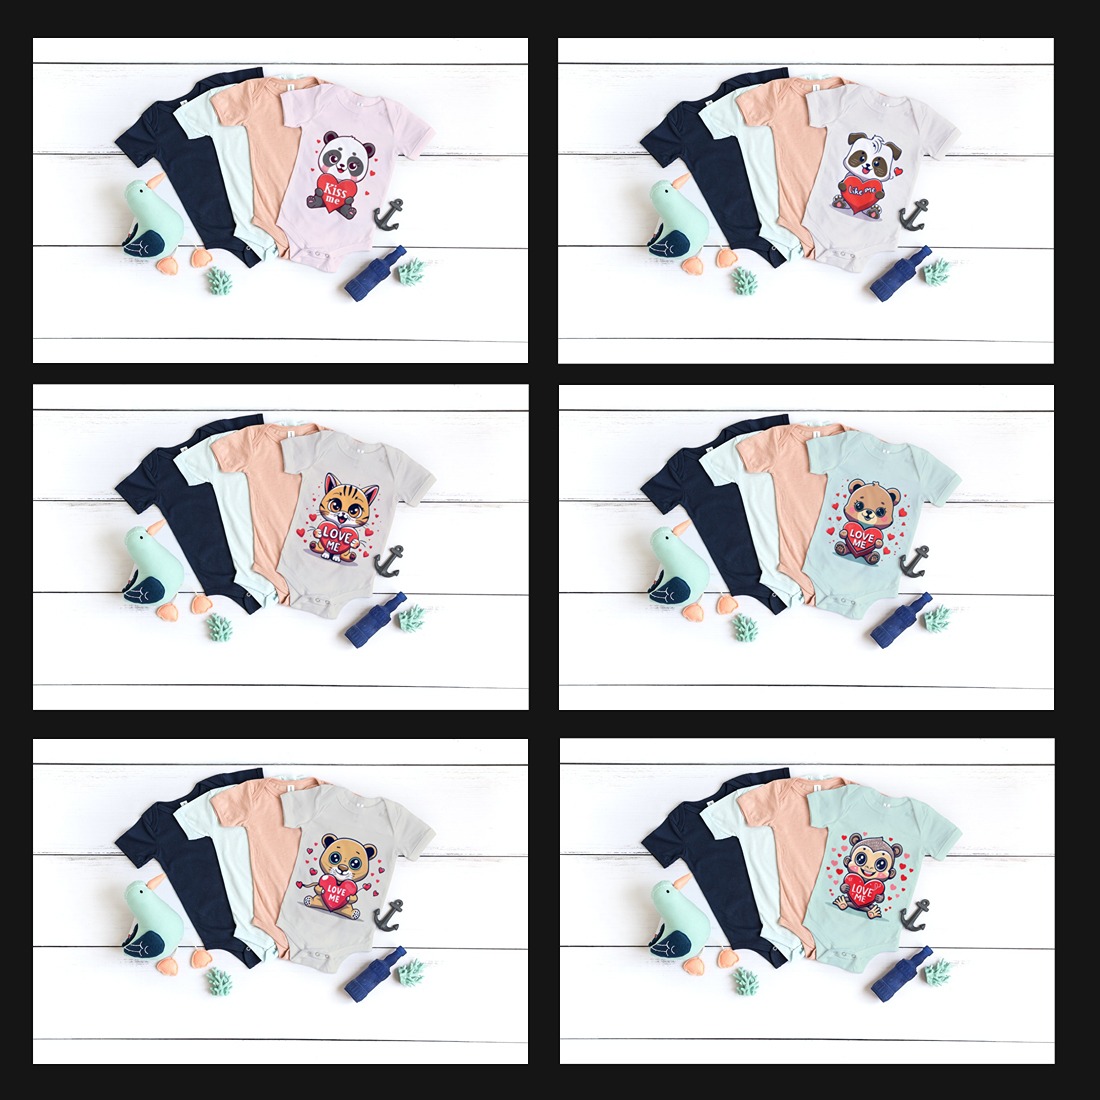 Toddler t-shirts - For Kids Design Template Total = 32 cover image.